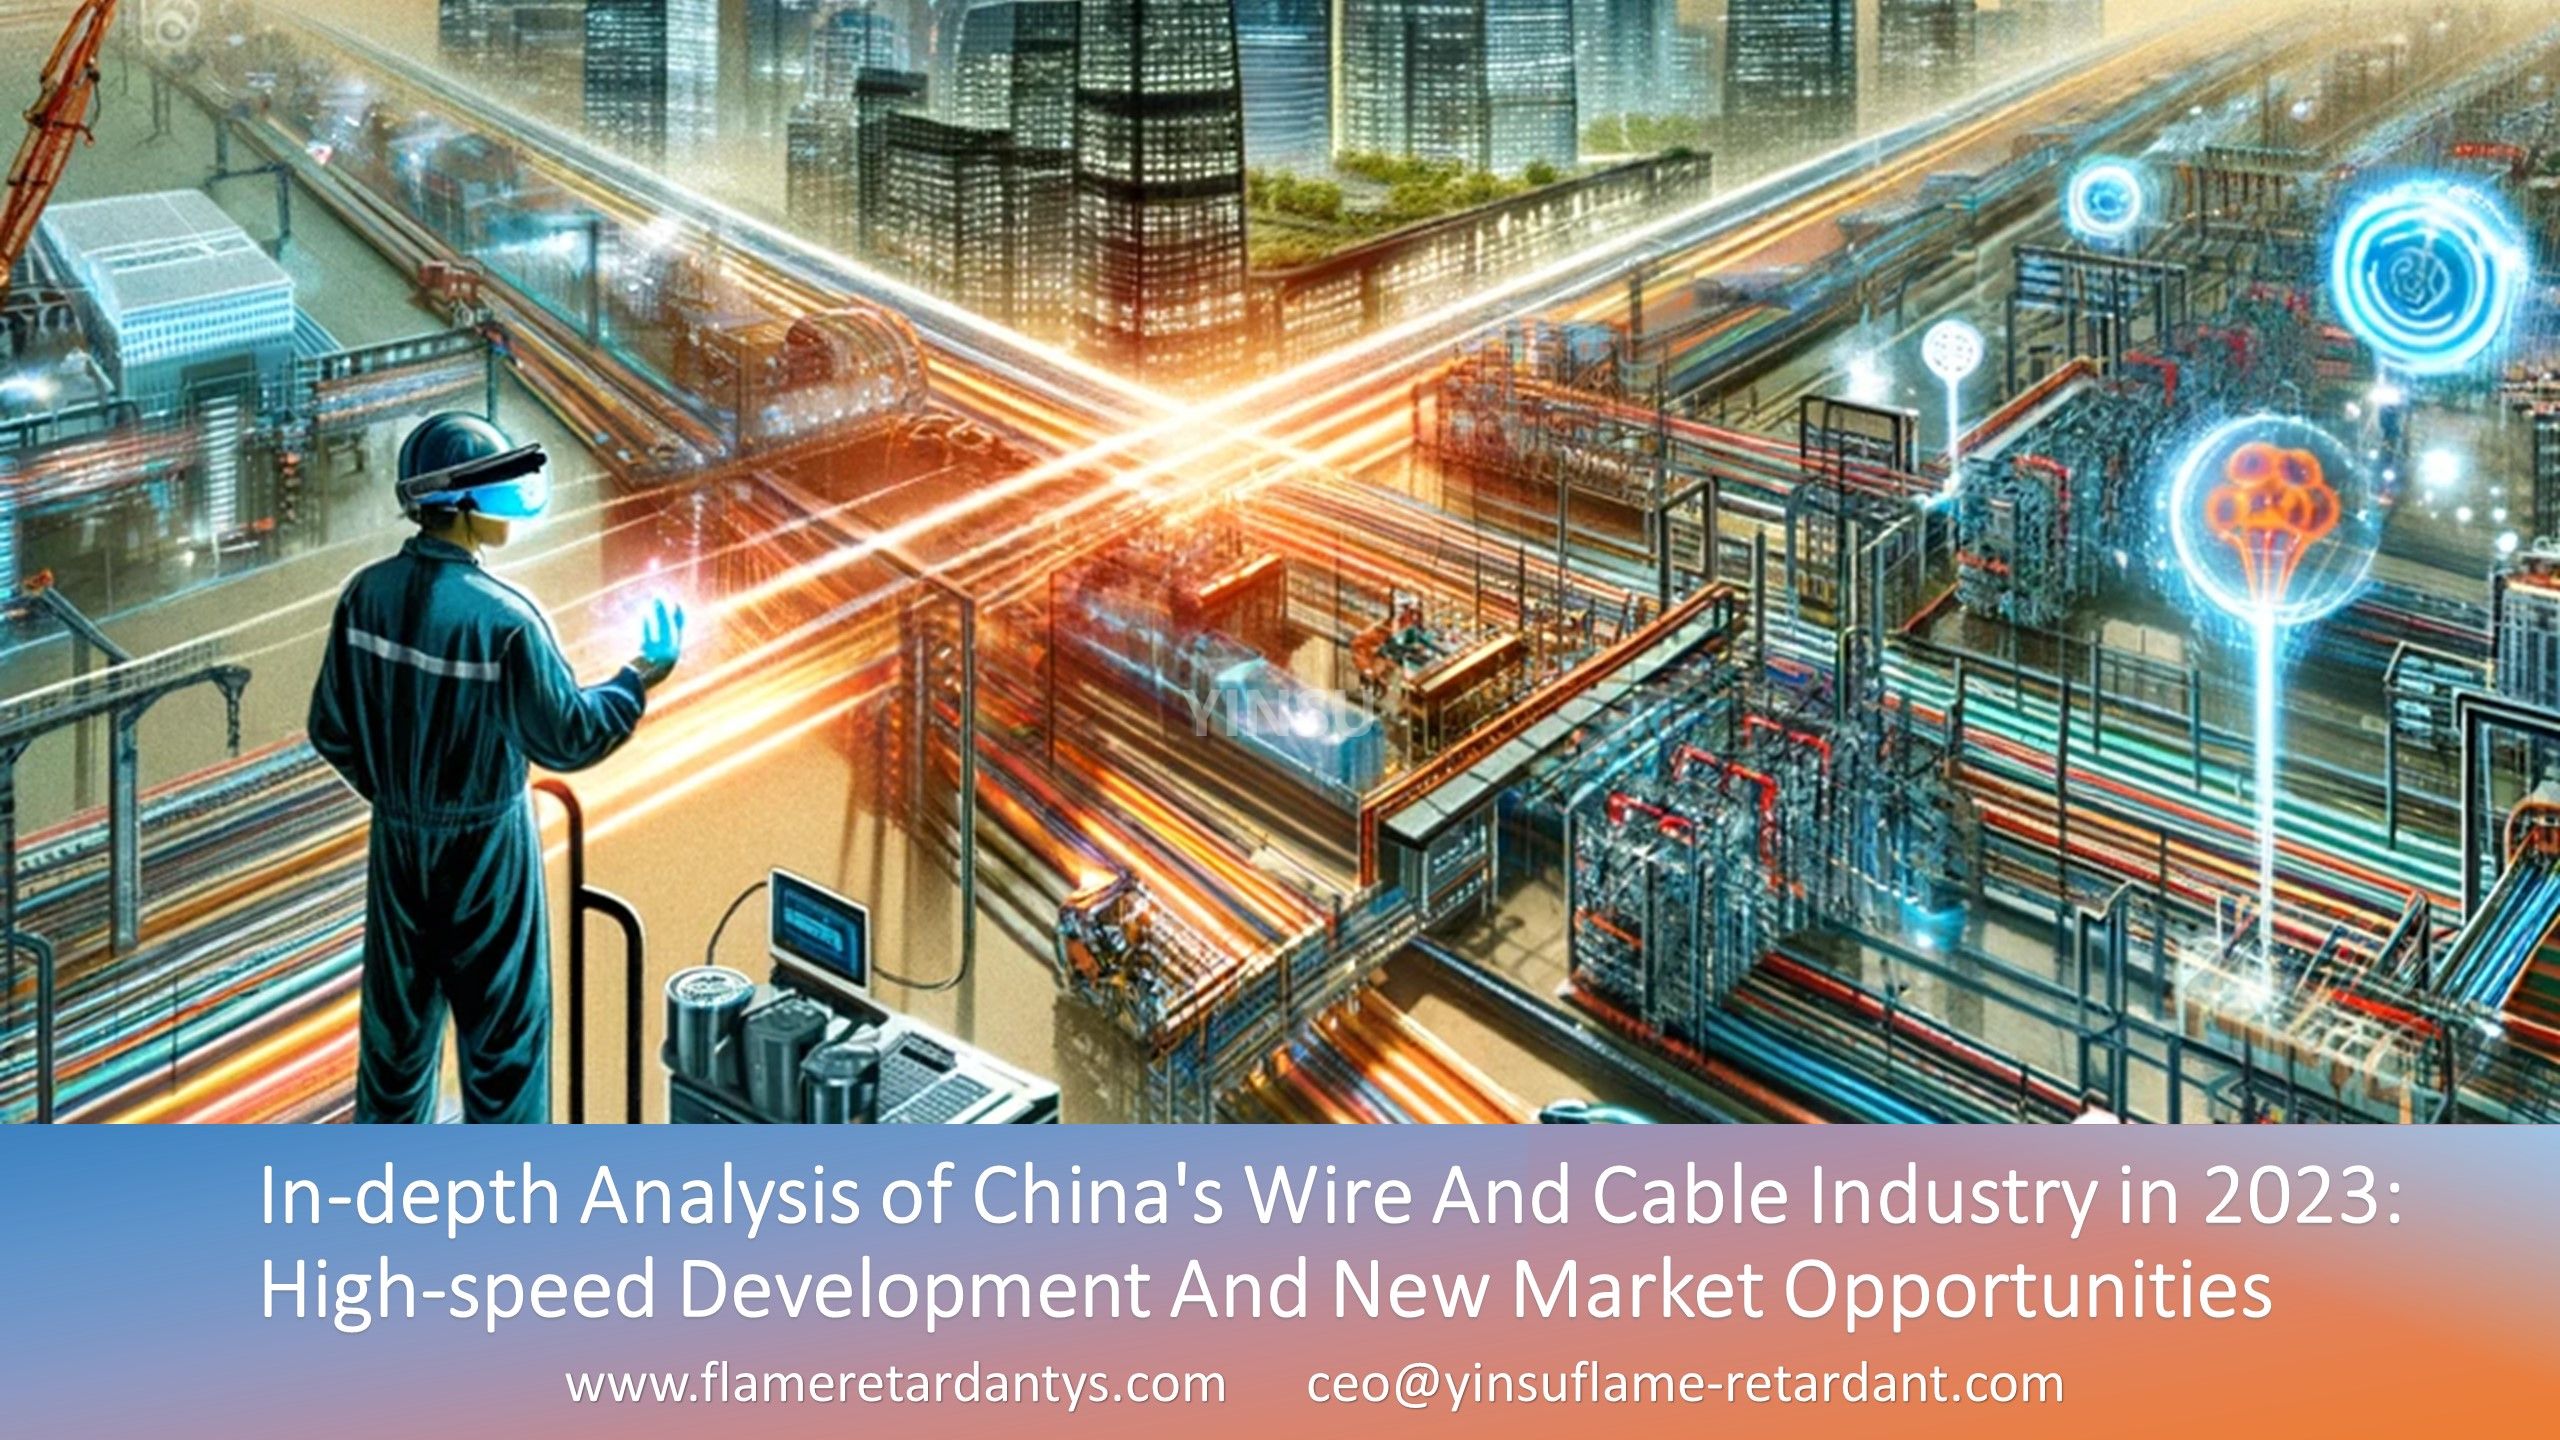 In-depth Analysis of China's Wire And Cable Industry in 2023: High-speed Development And New Market Opportunities